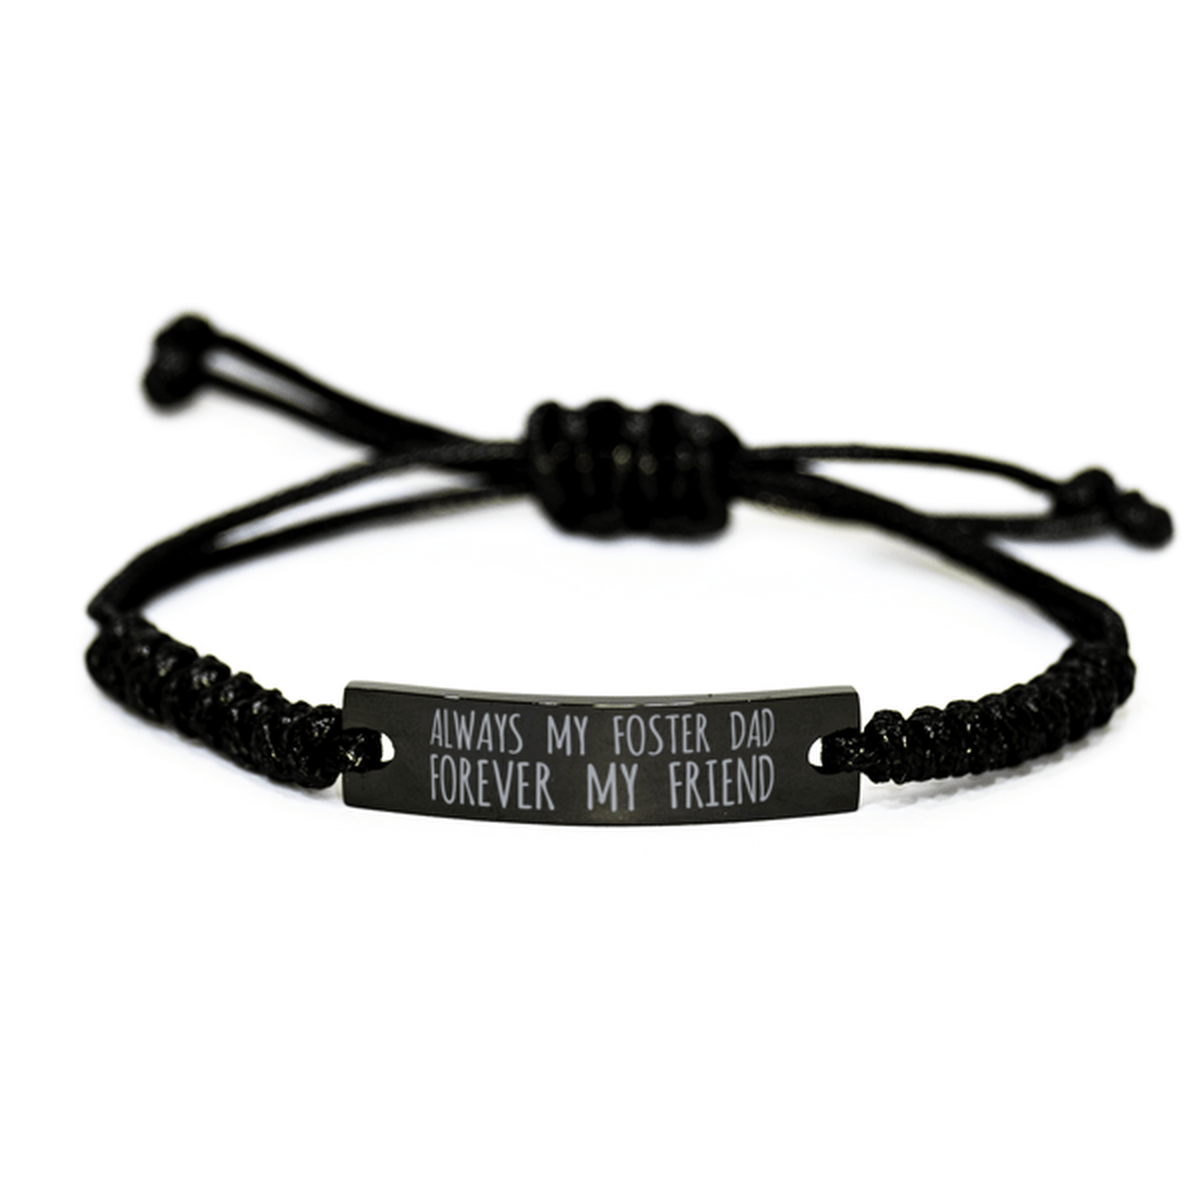 Inspirational Foster Dad Black Rope Bracelet, Always My Foster Dad Forever My Friend, Best Birthday Gifts For Family